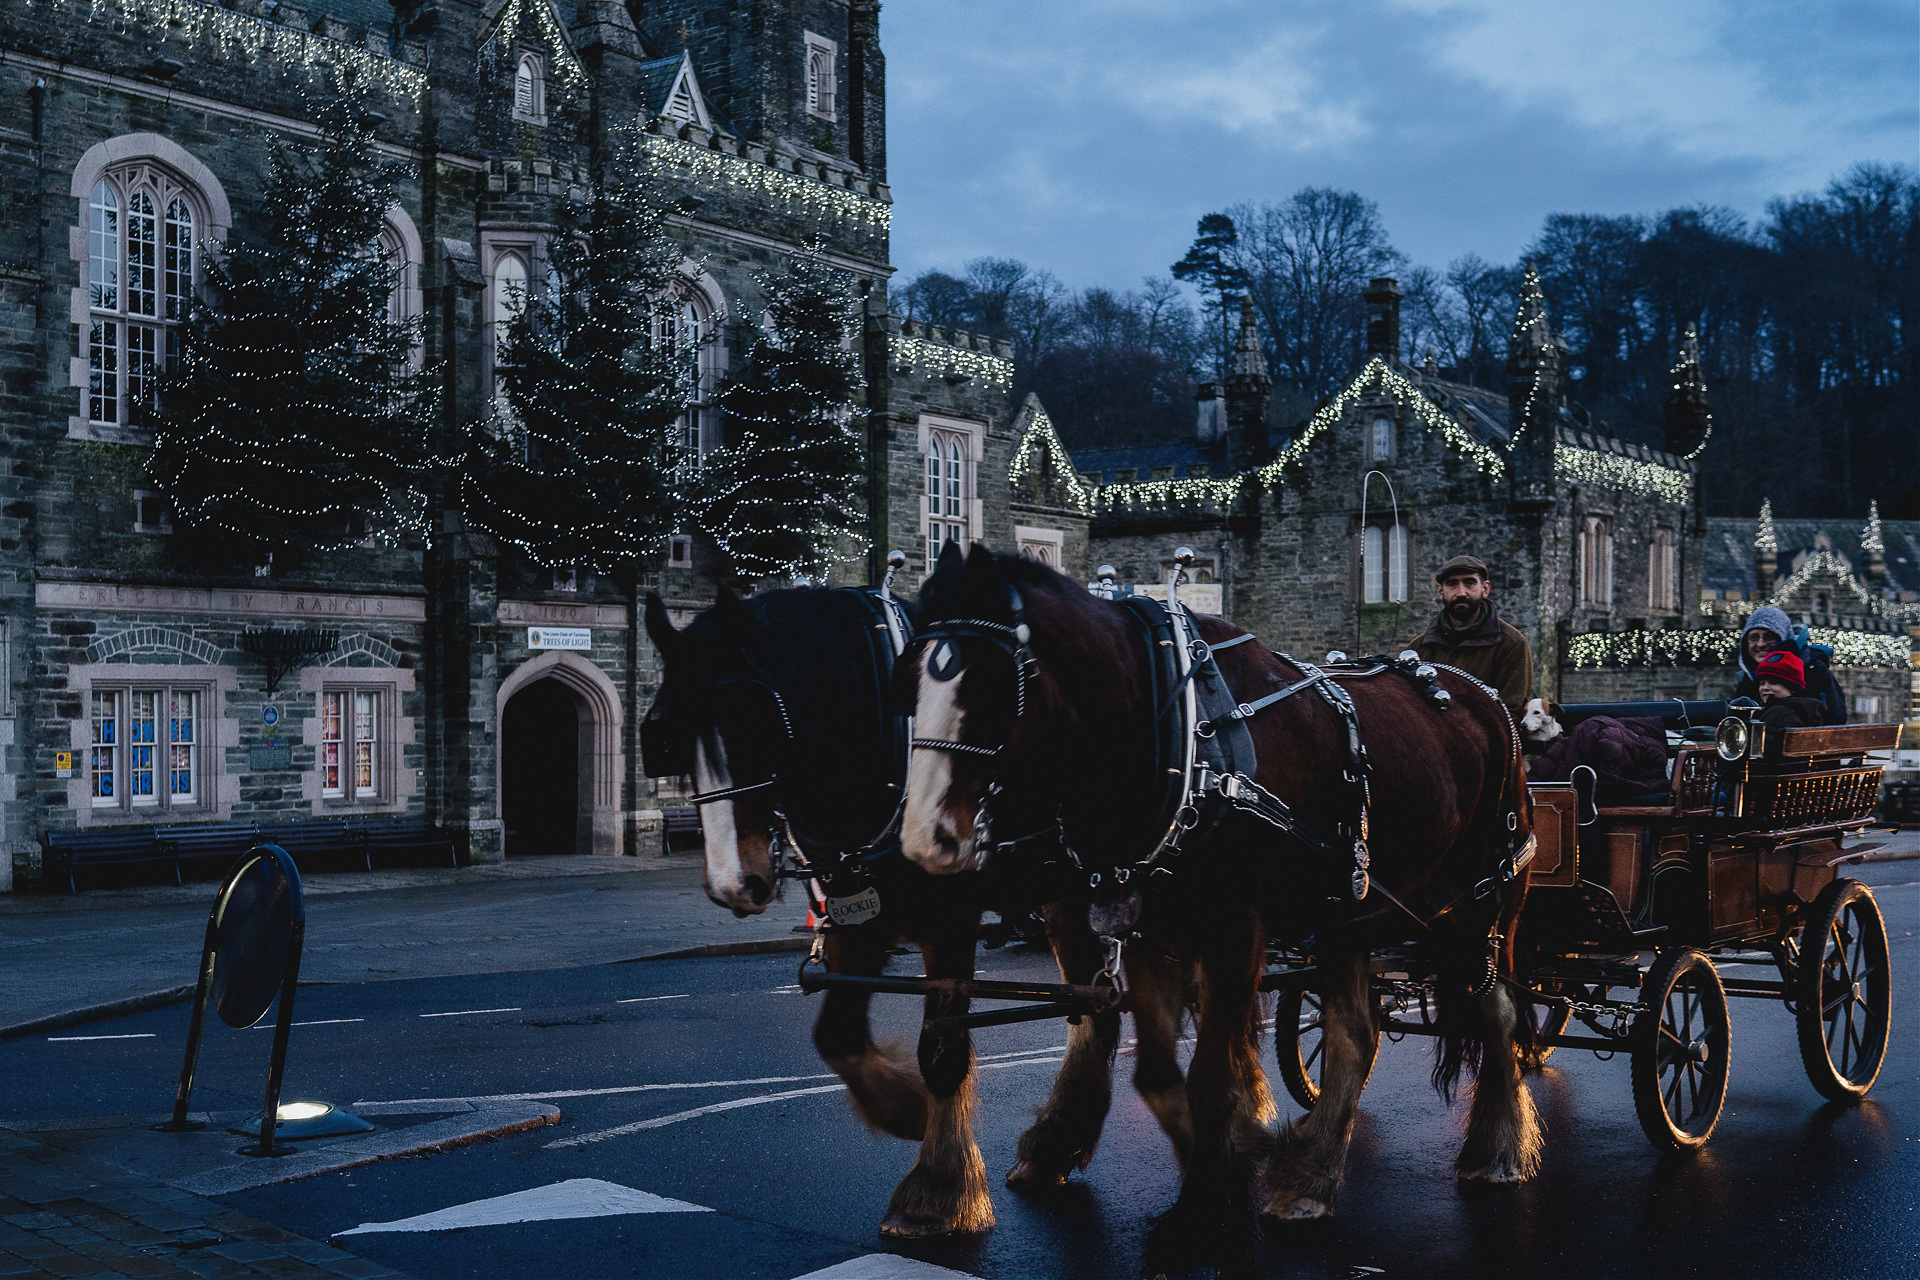 Horse and cart with Christmas lights in Tavistock